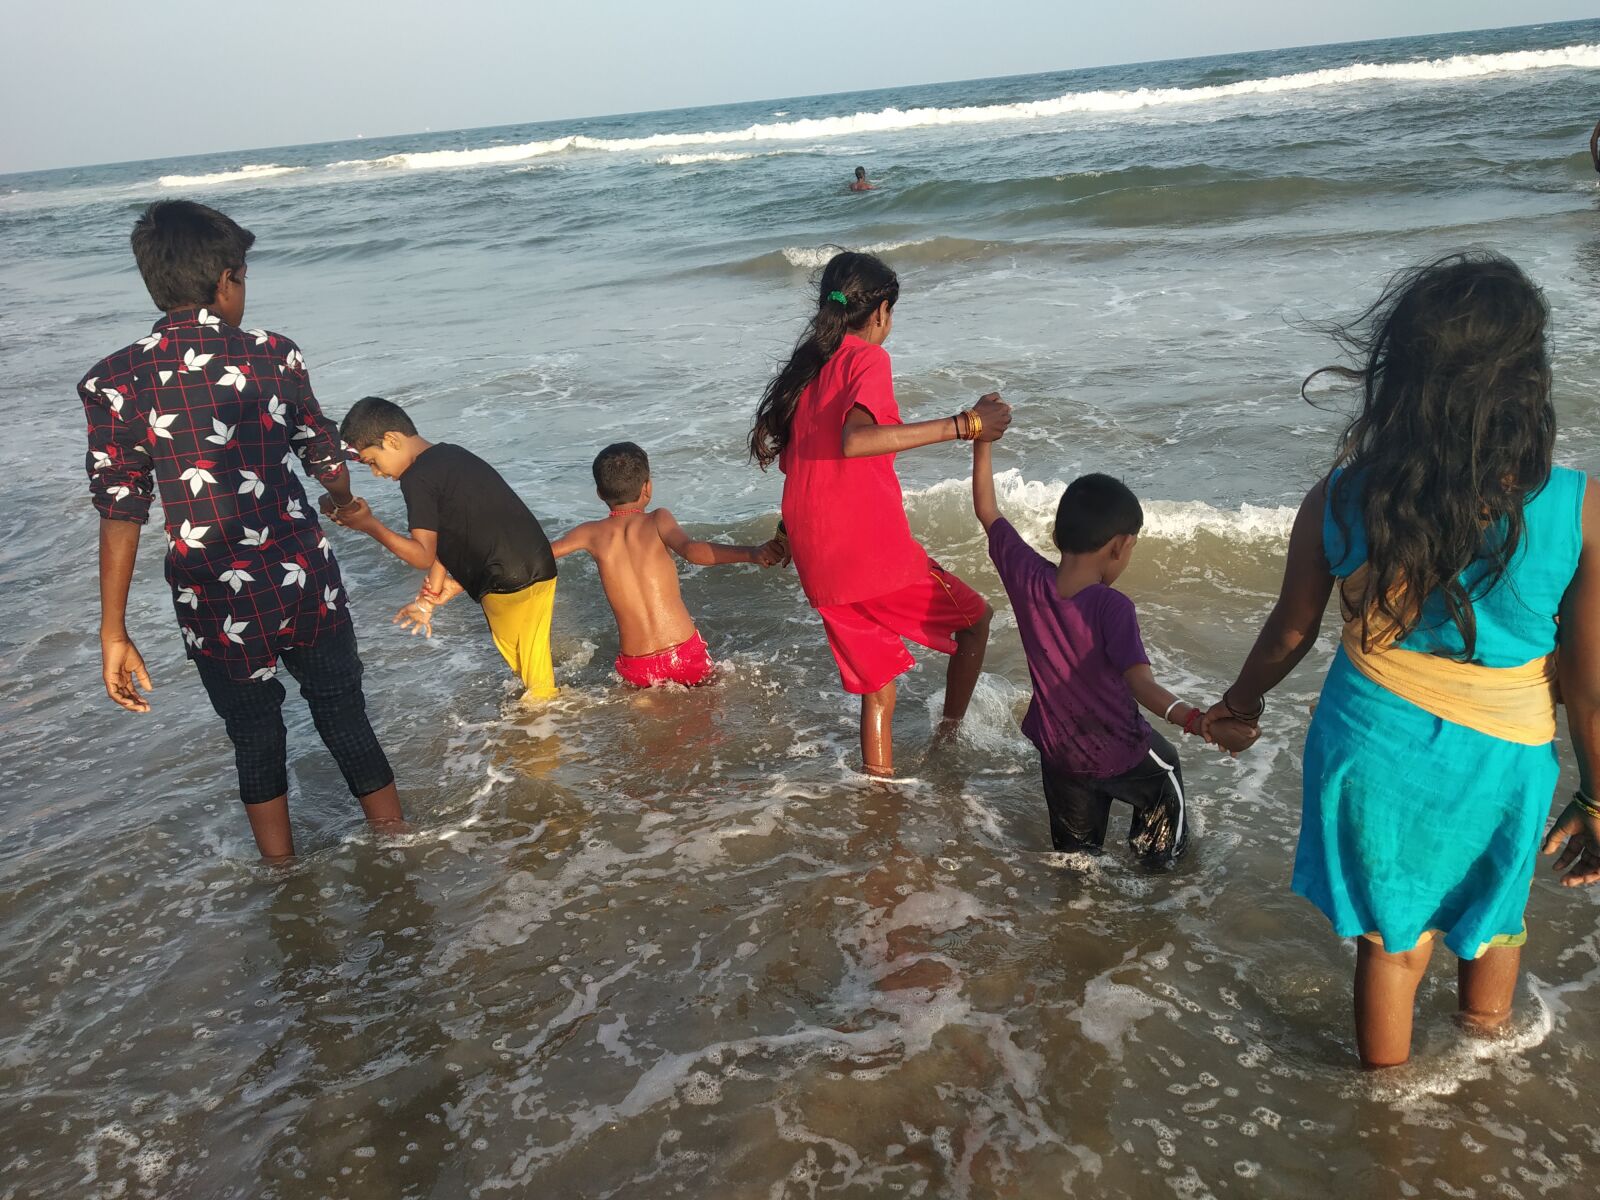 Xiaomi Redmi Note 5 Pro sample photo. Indian sea, children's playing photography